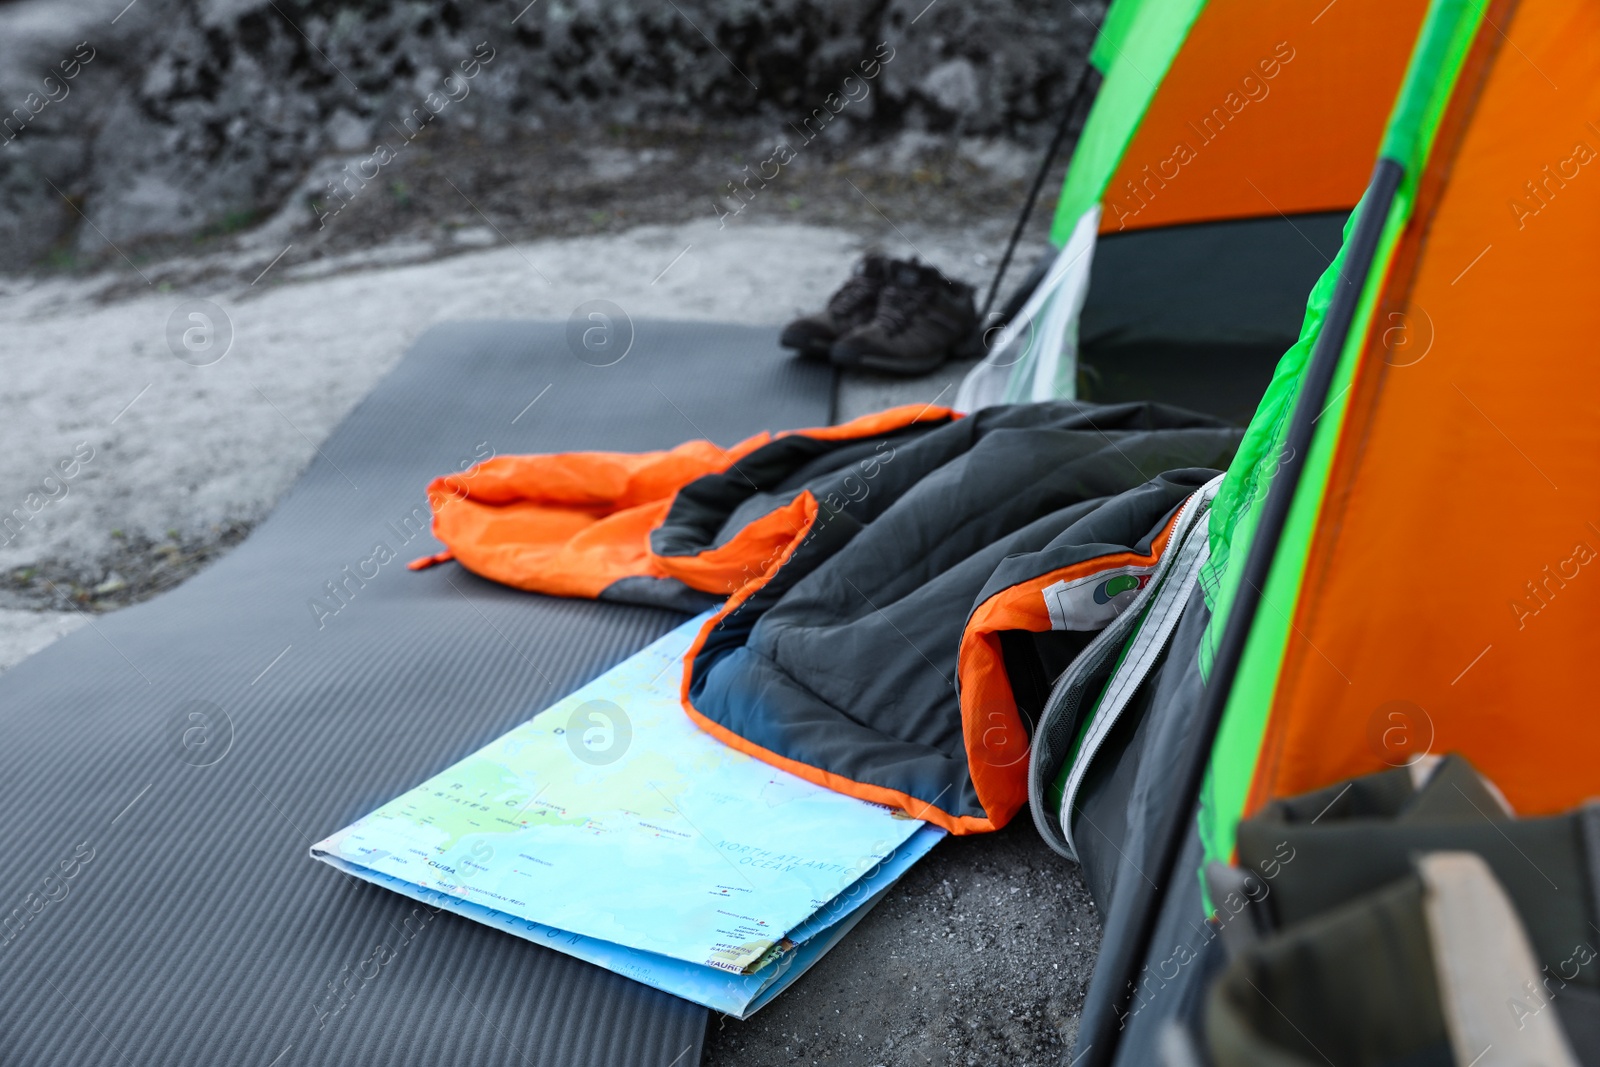 Photo of Sleeping bag and other camping gear outdoors